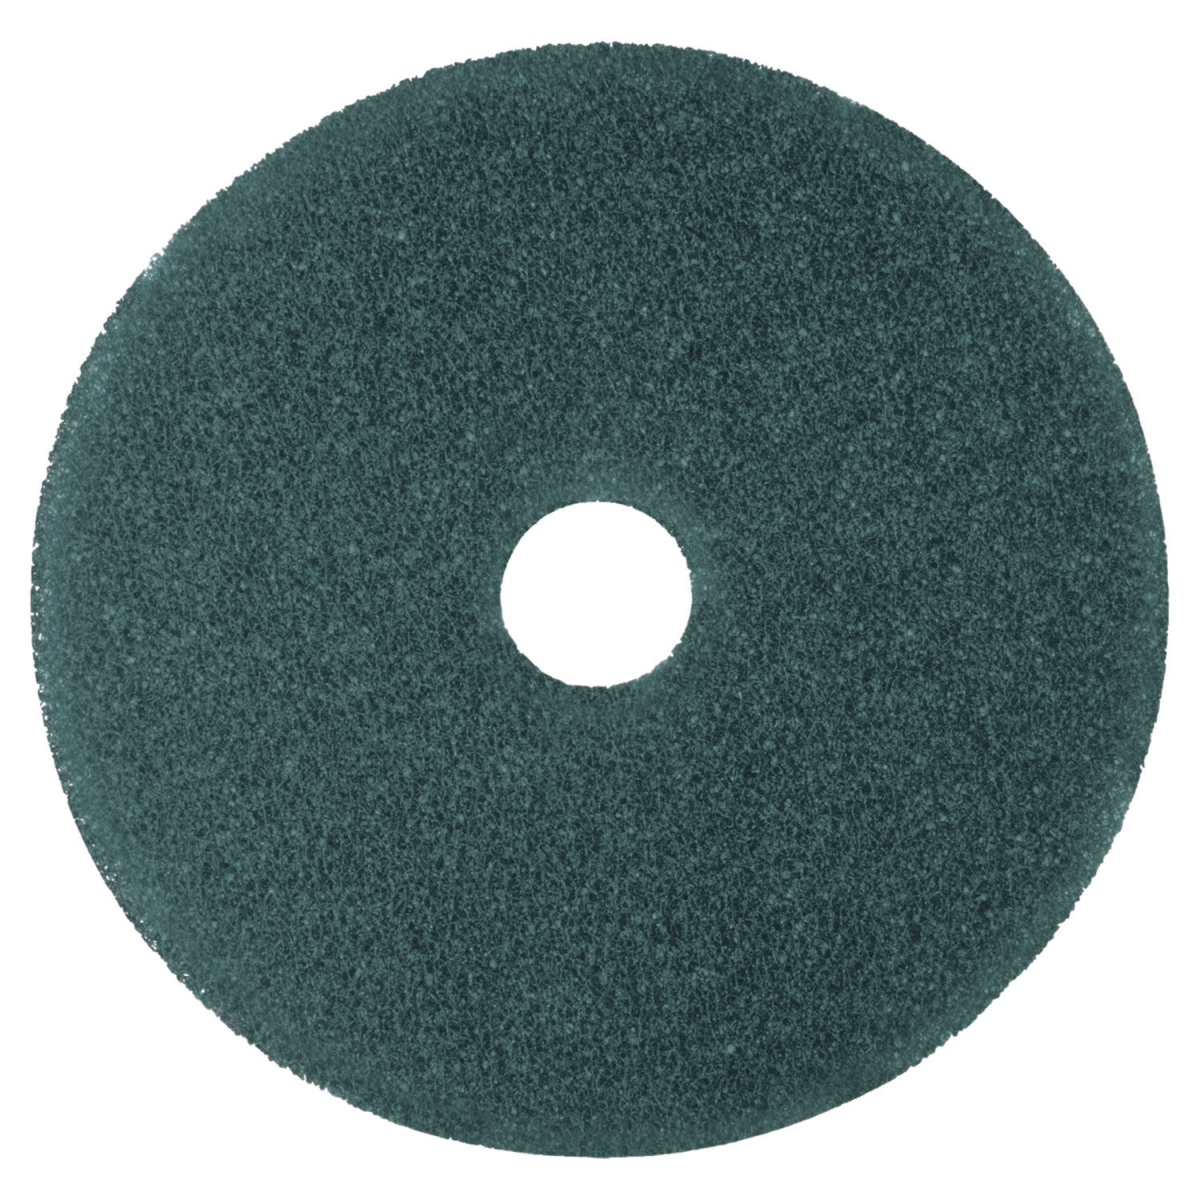 Picture of 3M MMM08410 17 in. Low-Speed High Productivity Floor Cleaner Pads - Pack of 5